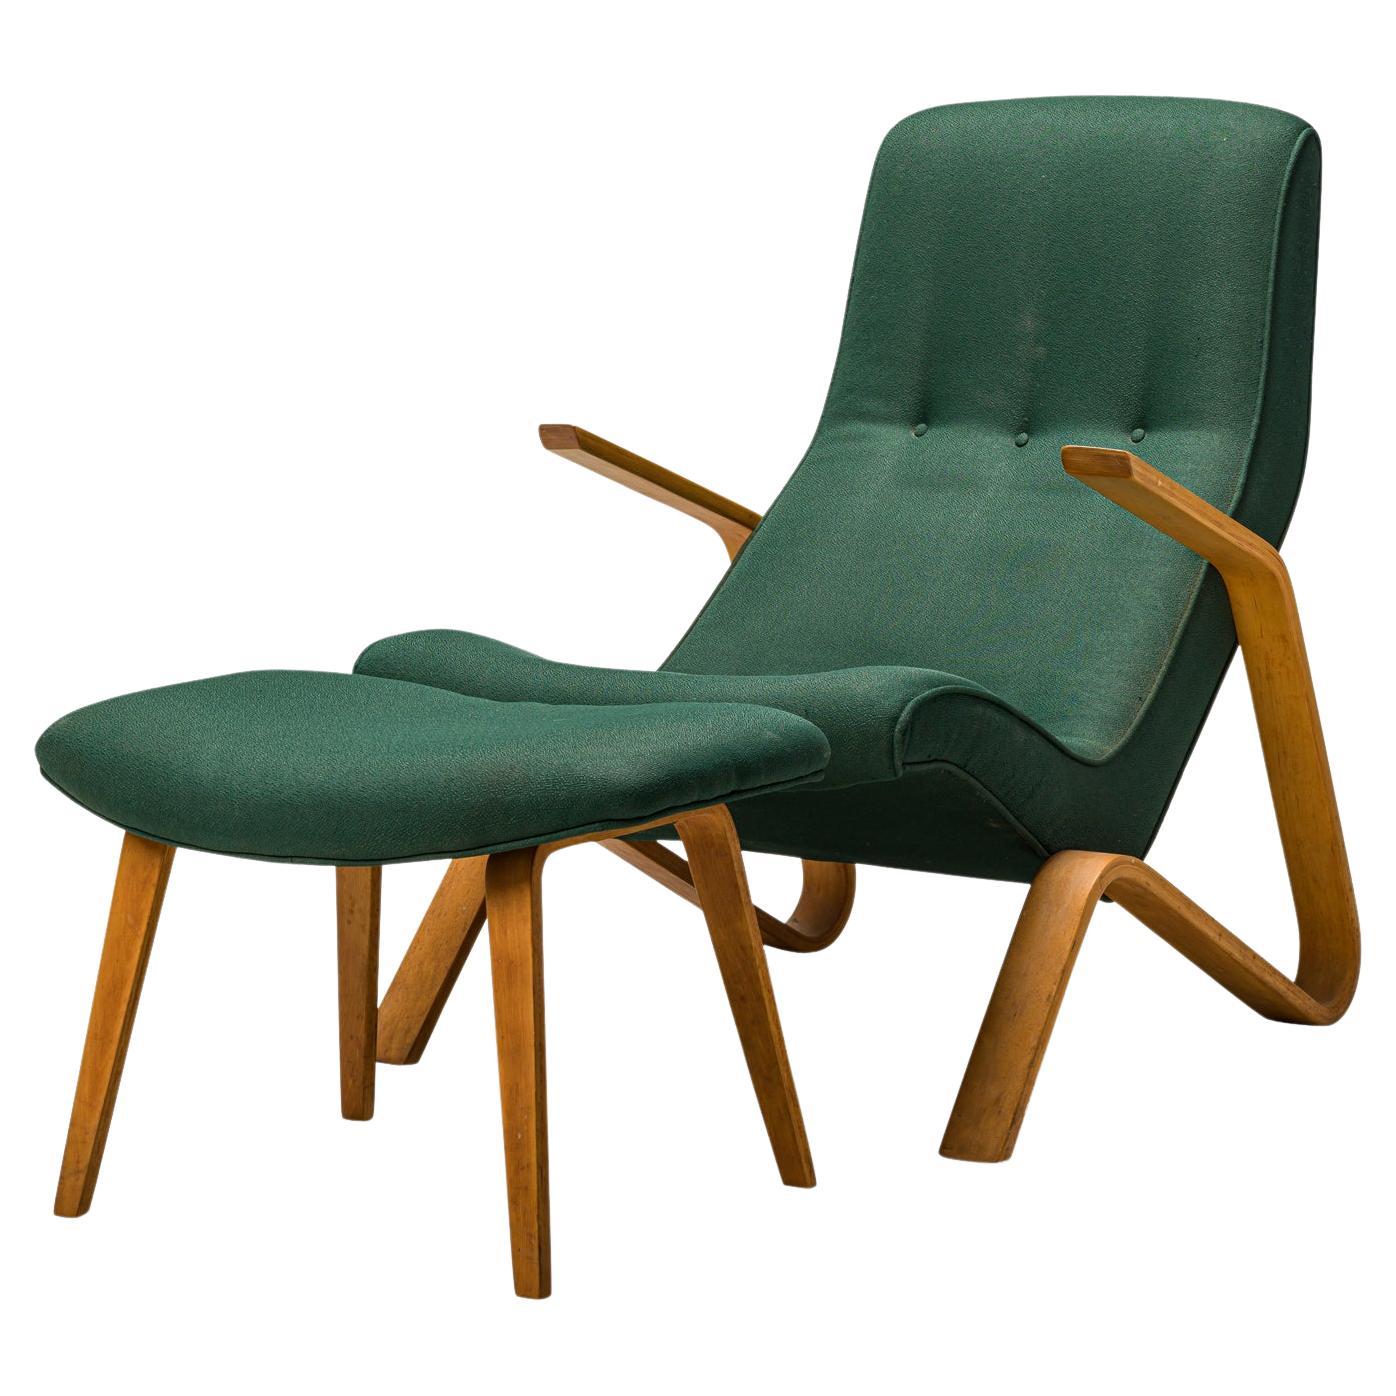 Eero Saarinen for Knoll Green Fabric Upholstered Grasshopper Chair and Footstool